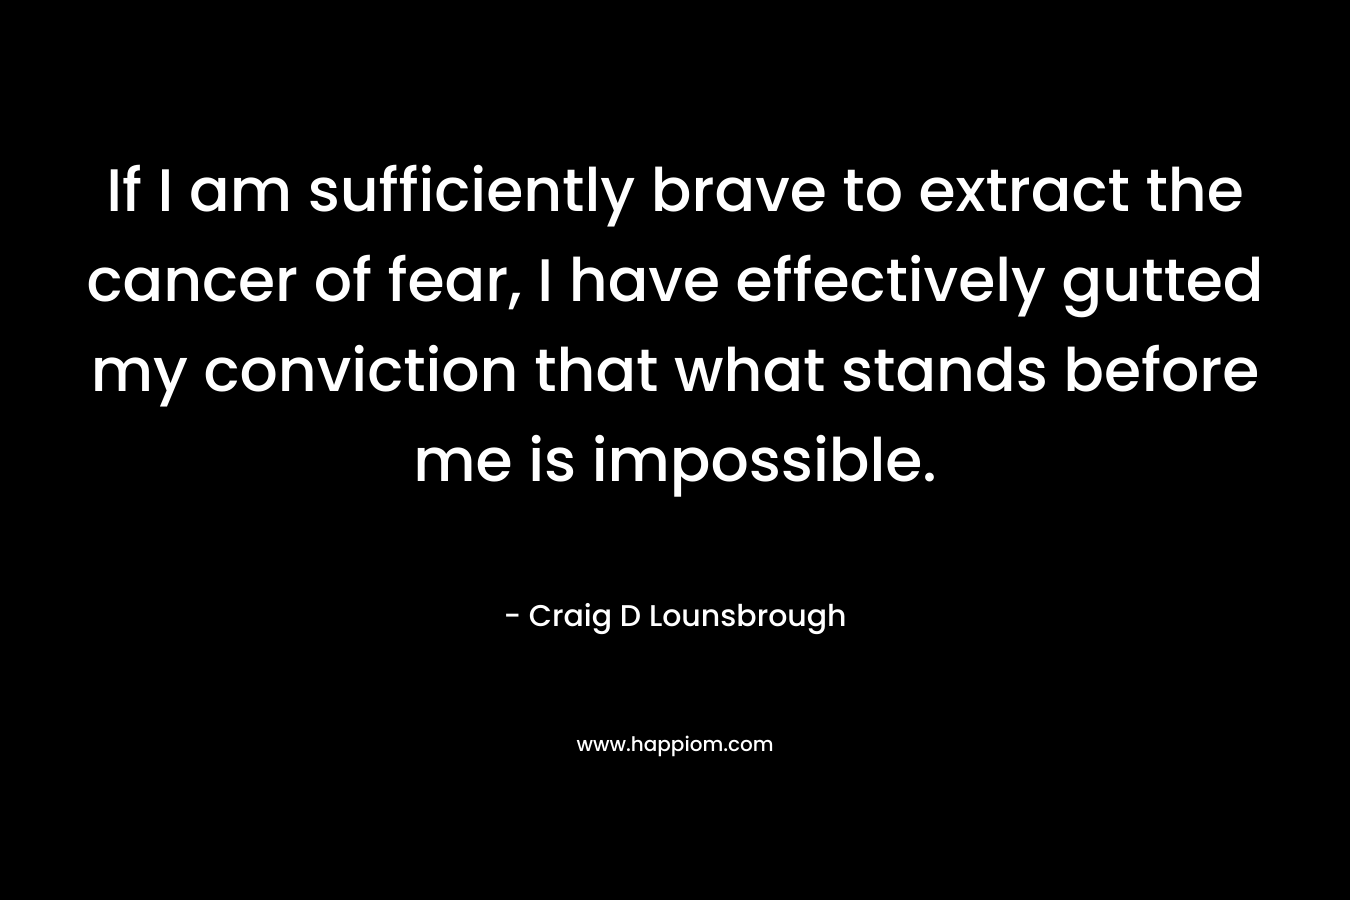 If I am sufficiently brave to extract the cancer of fear, I have effectively gutted my conviction that what stands before me is impossible.